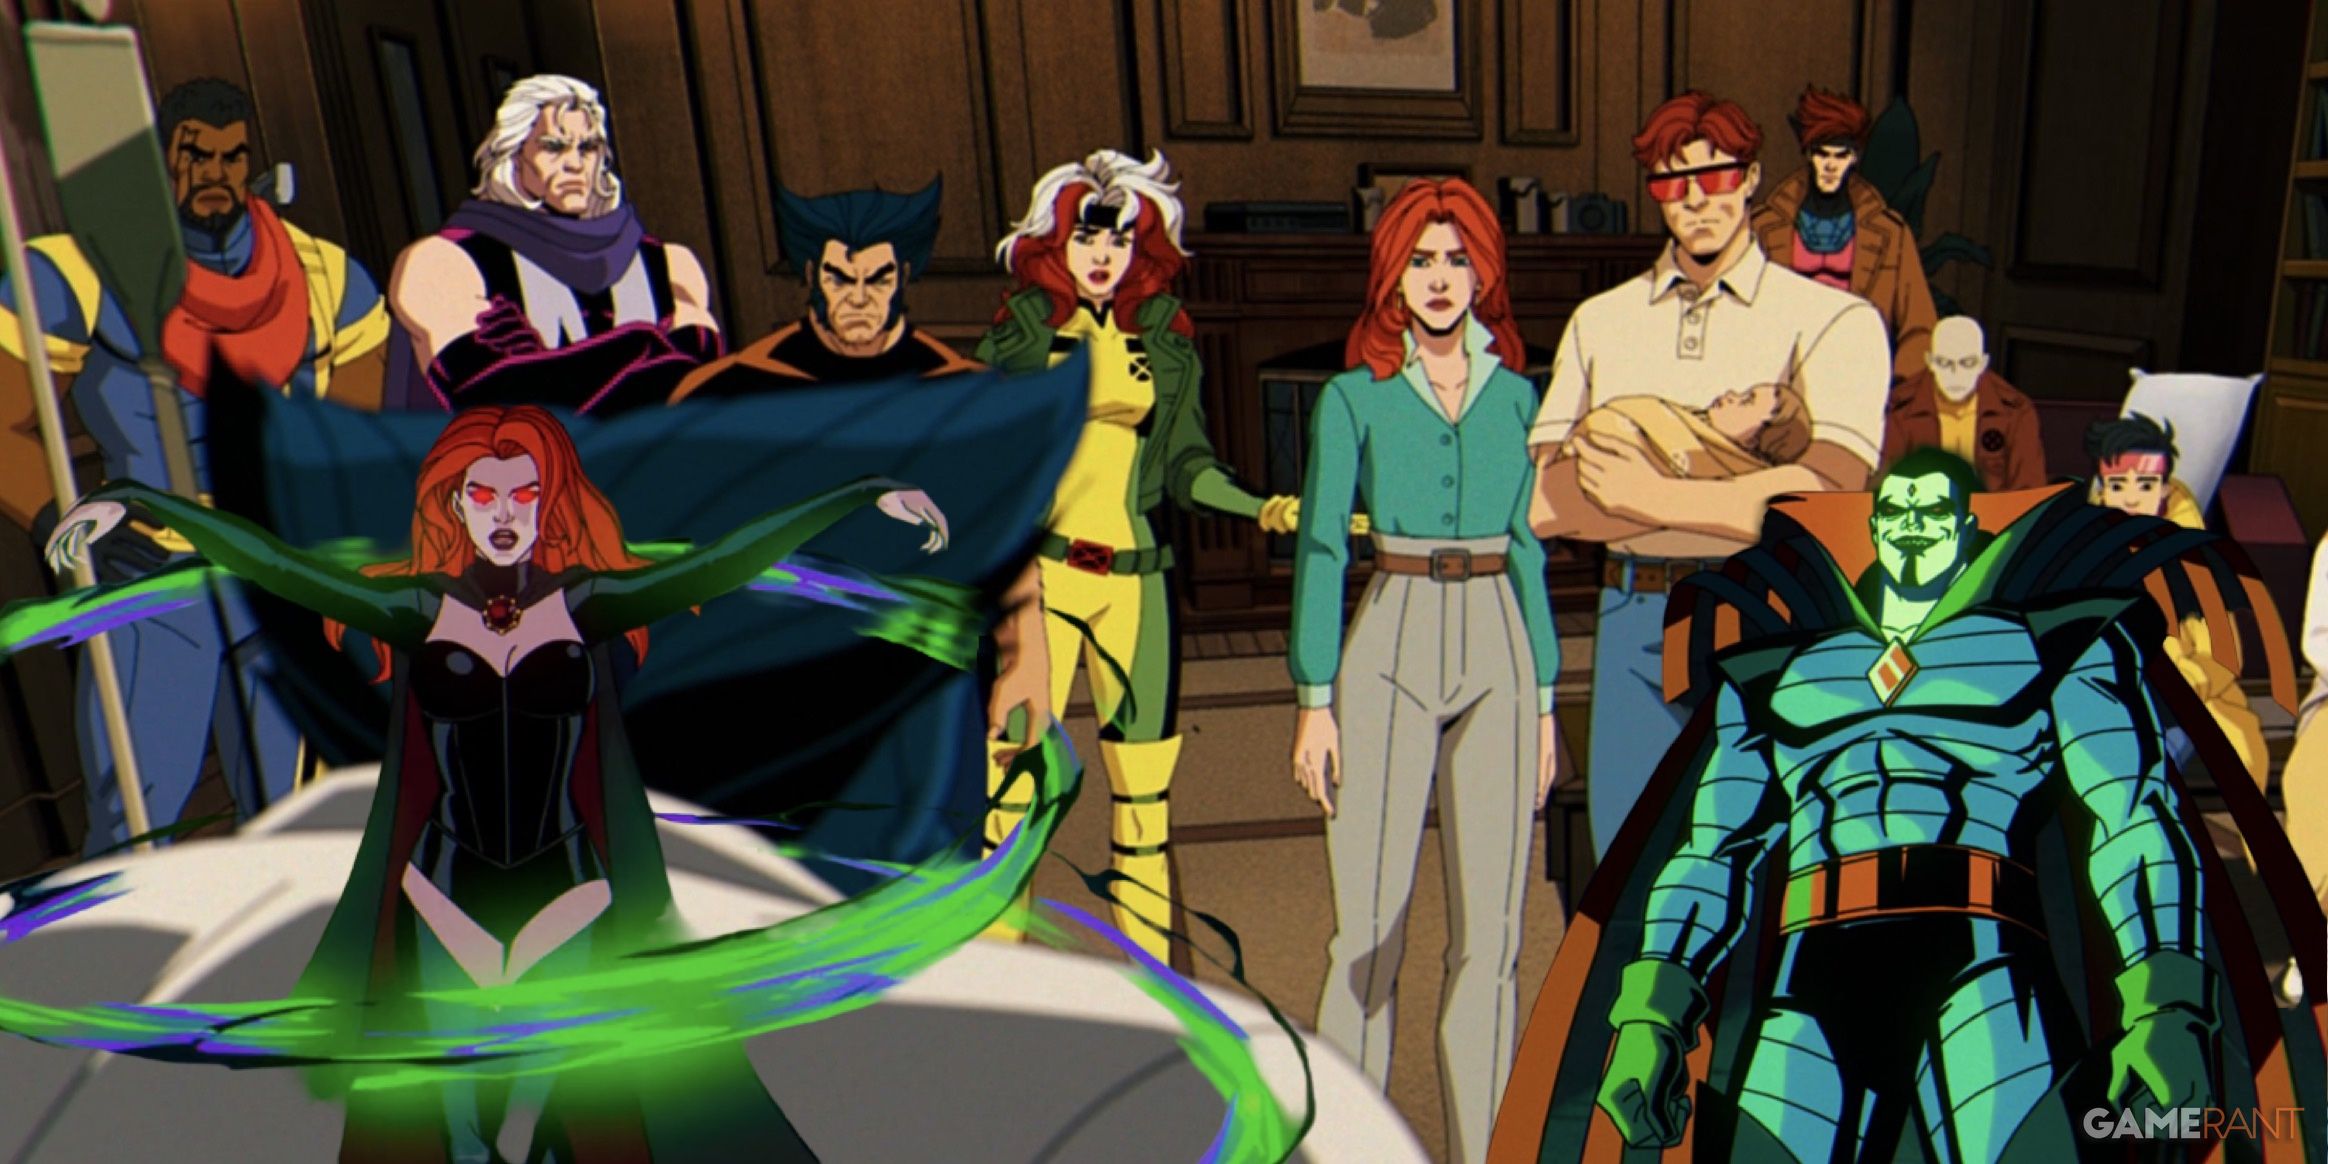 x-men 97 episode 3 team in x mansion with mister sinister and goblin queen Cropped